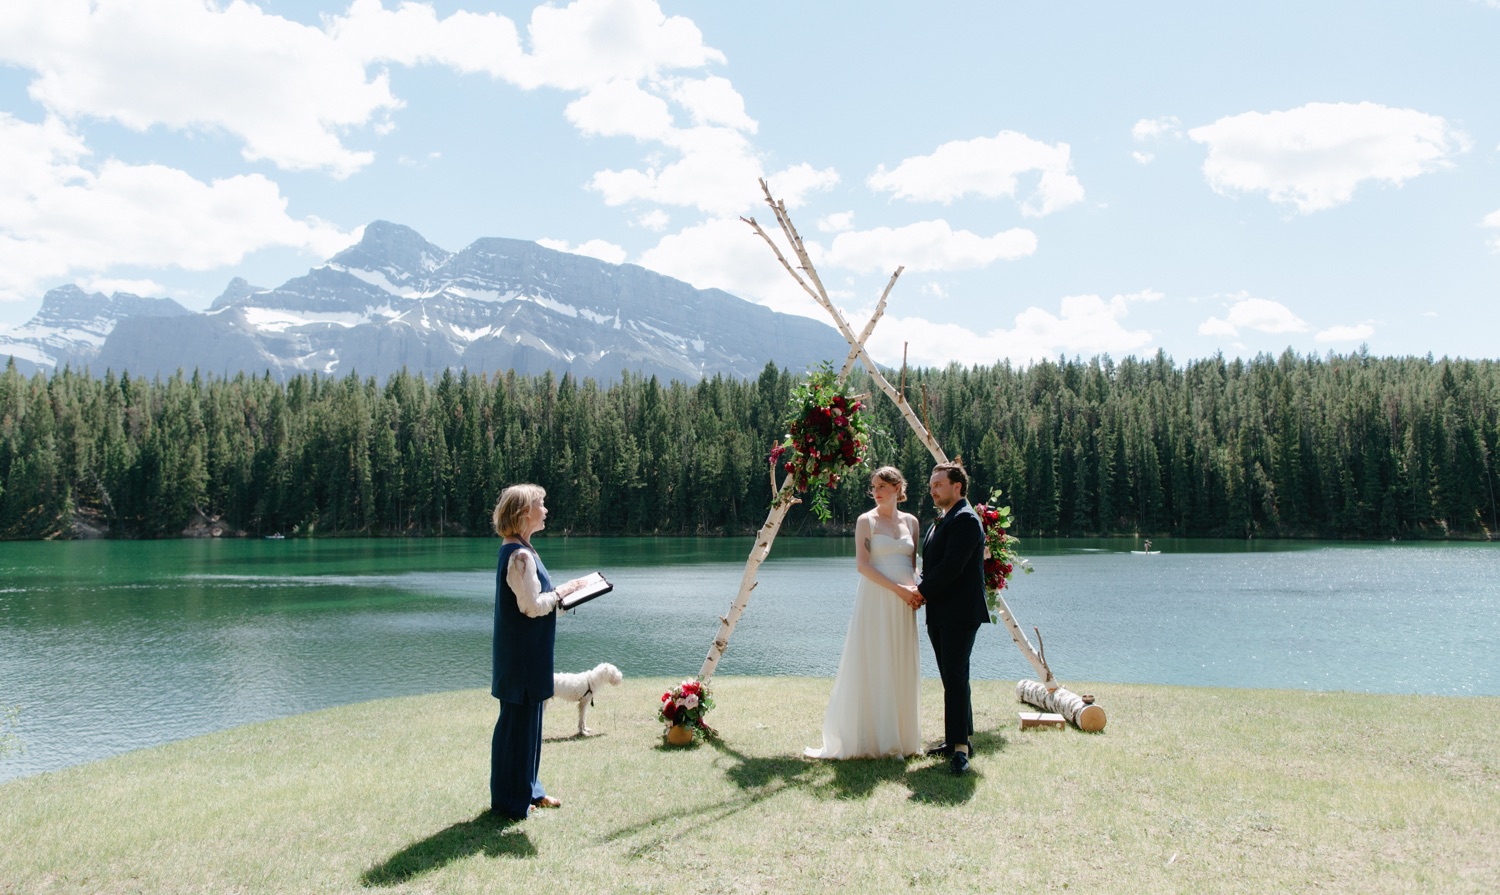 Intimate wedding ceremony at Johnson Lake, with couple standing under birch altar with mahogany florals, as Barbara Parker officiates